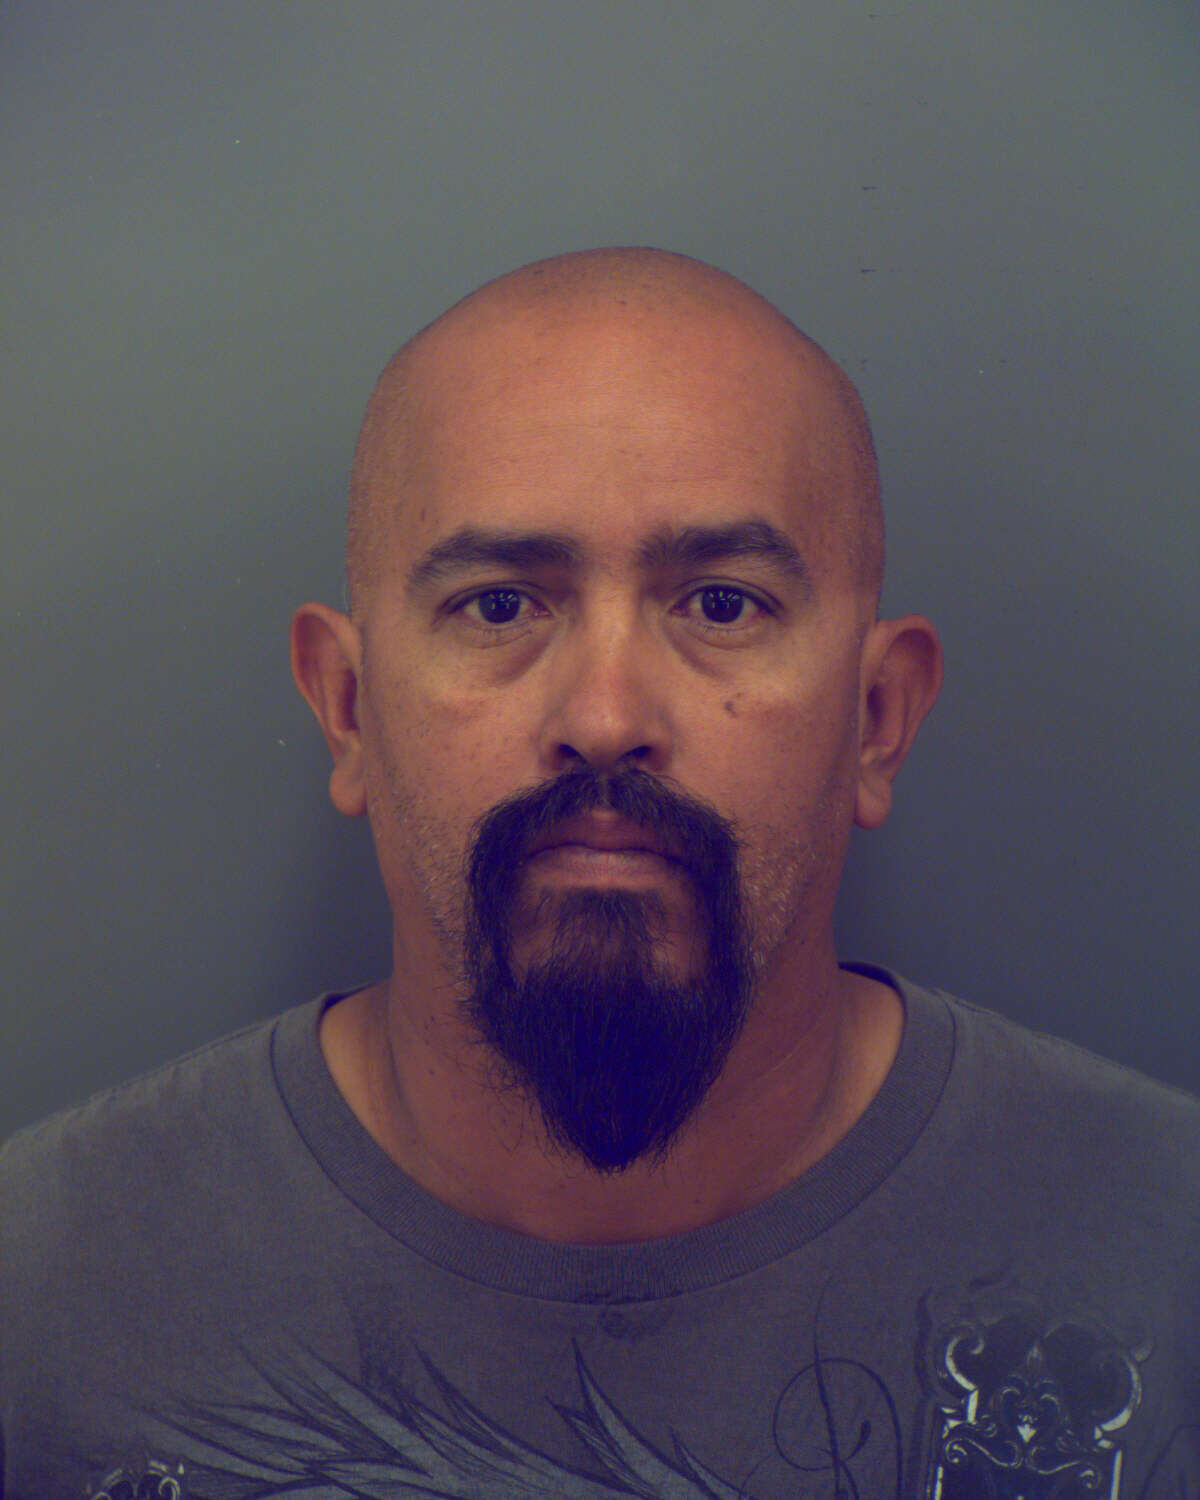 Dean Rascon, 45, is a member of the "One" motorcycle club and was arrested Nov. 1, 2016 for engaging in organized criminal activity and aggravated robbery.